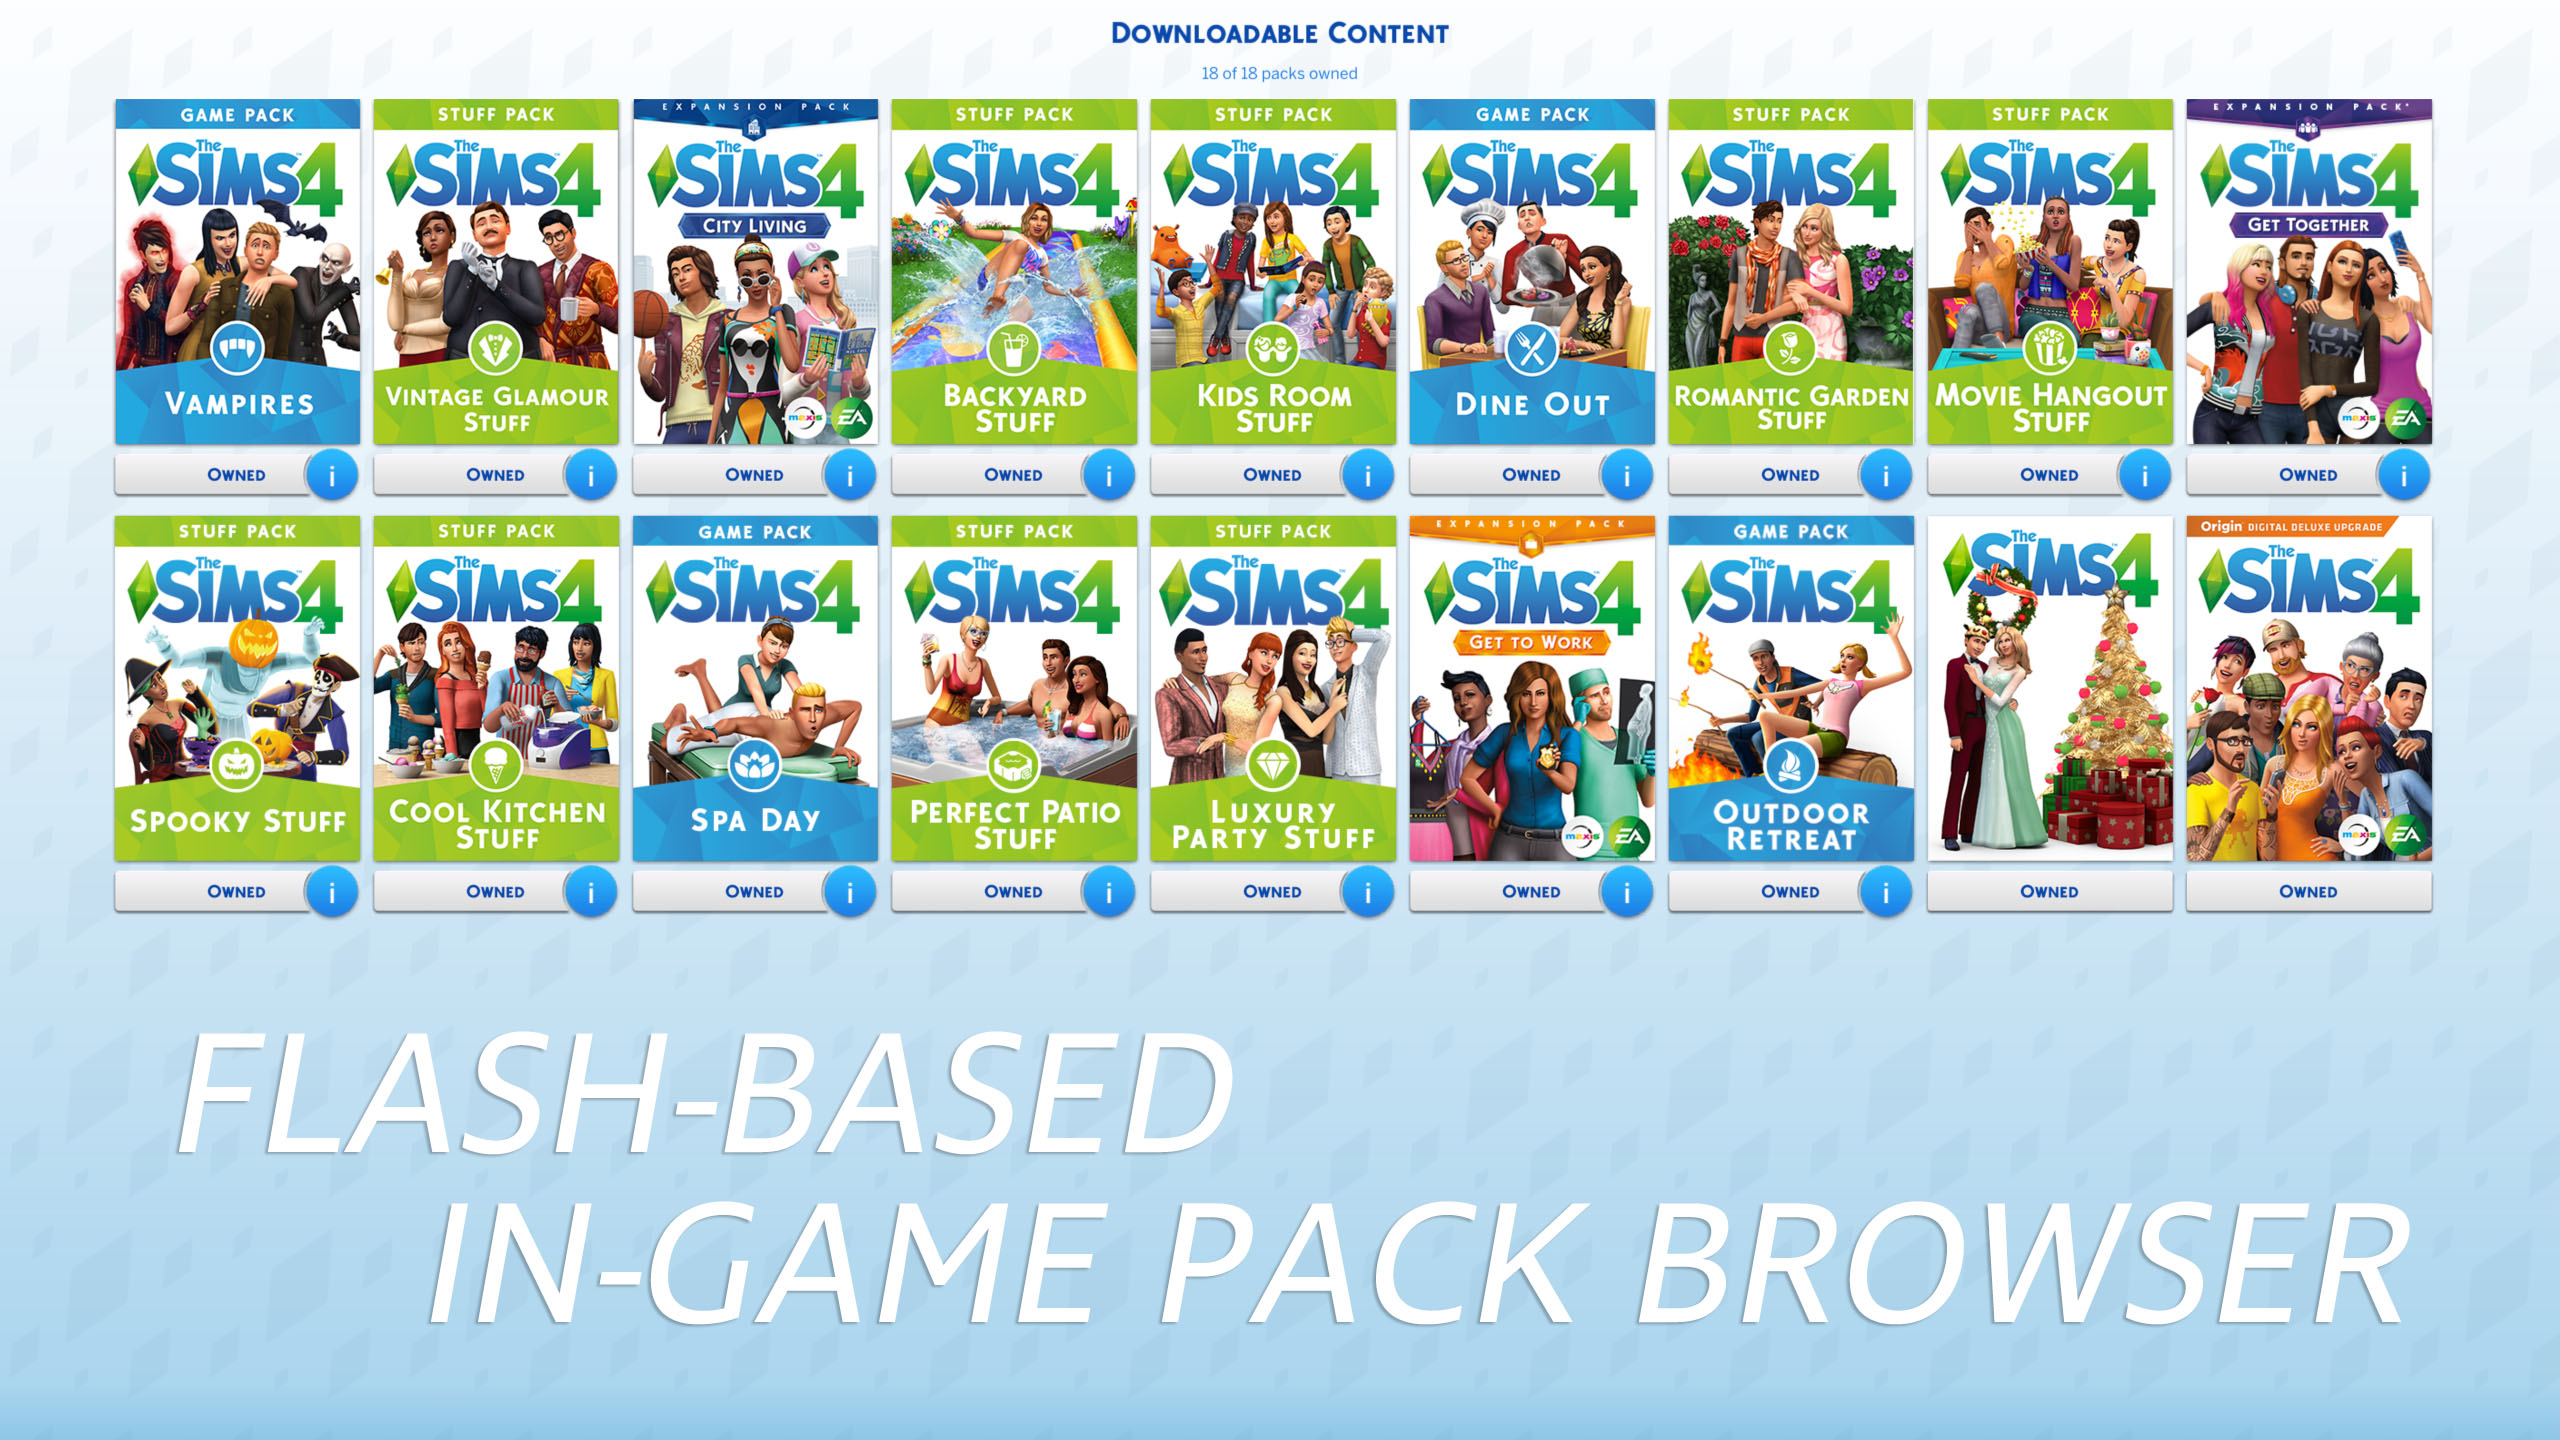 The sims 2 complete collection